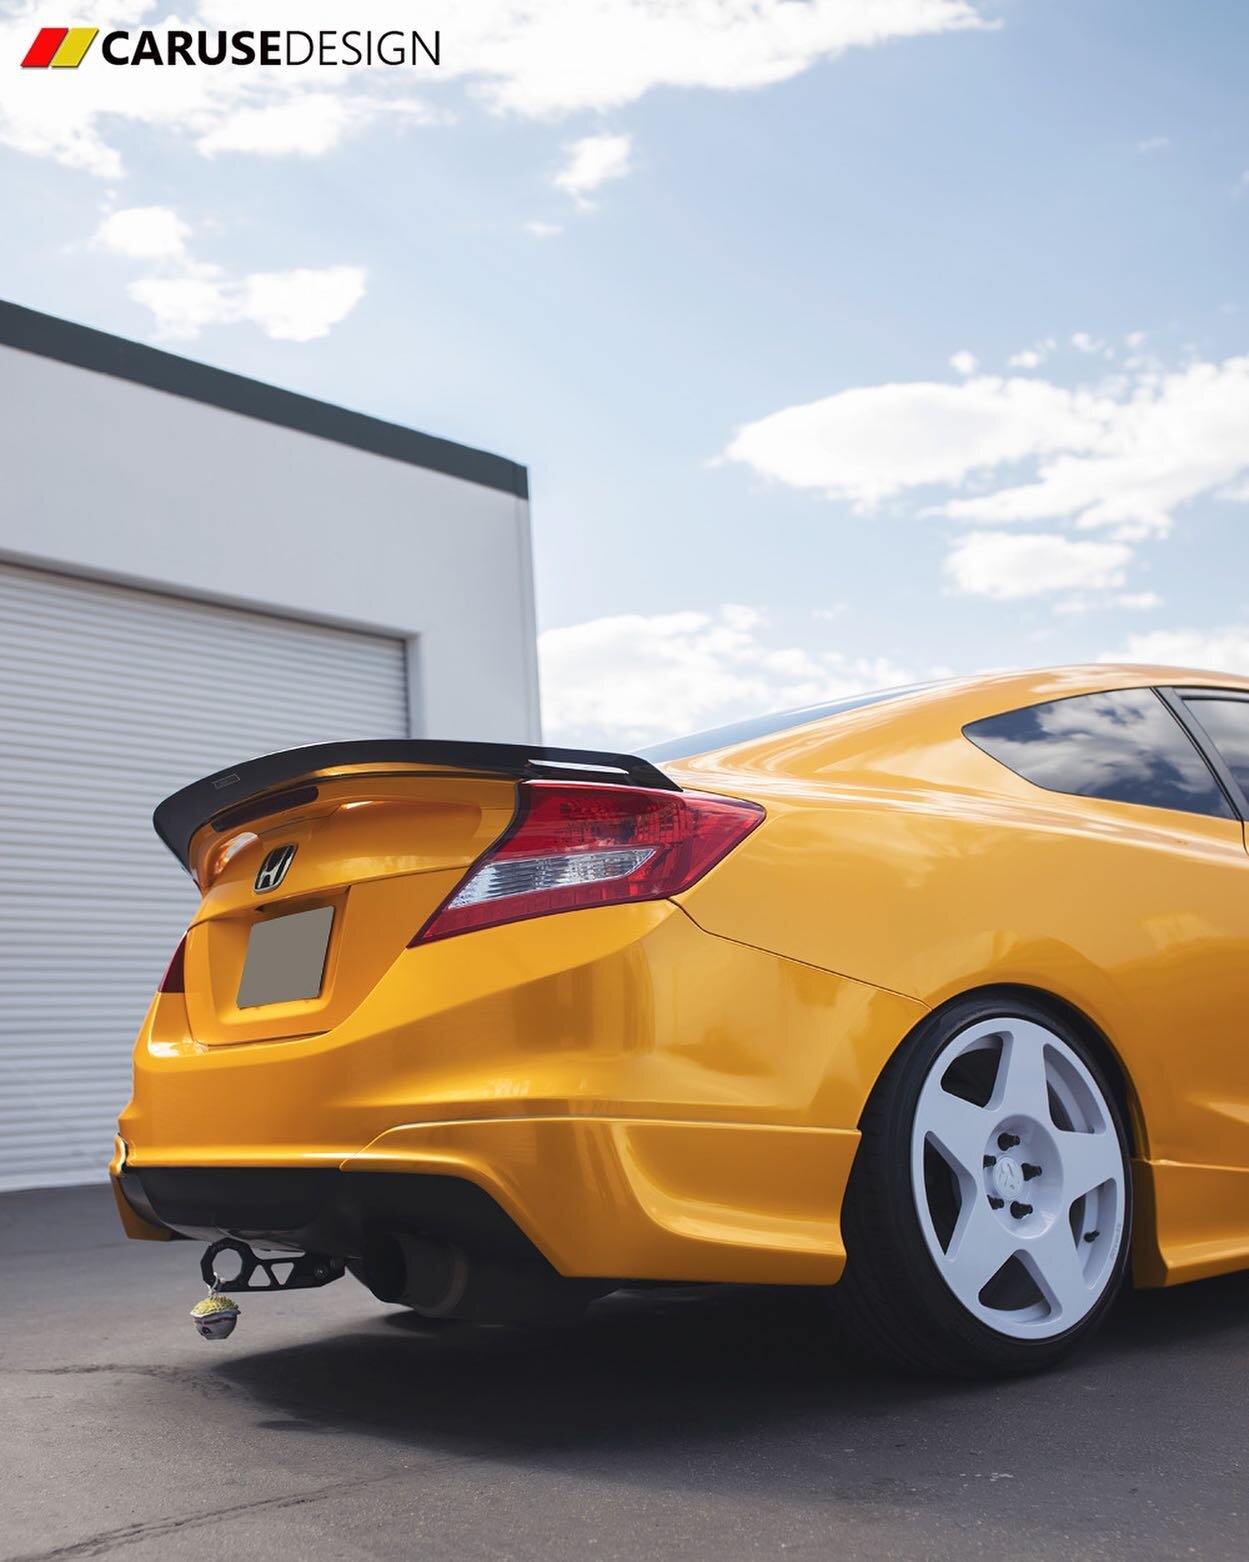 FG4 Zenki Aero Flap

Functionality, Aesthetically pleasing, Fitment are the key points in our creations. 

#CaRusedesign #aeroflap #purepassion #hondacivic #civic #9thgencivic #civicsi #9thgencivicsi #fg4 #fg2 #fg1 #fa5 #fd2 #fb6 #fd5 #K20 #vtec #k24